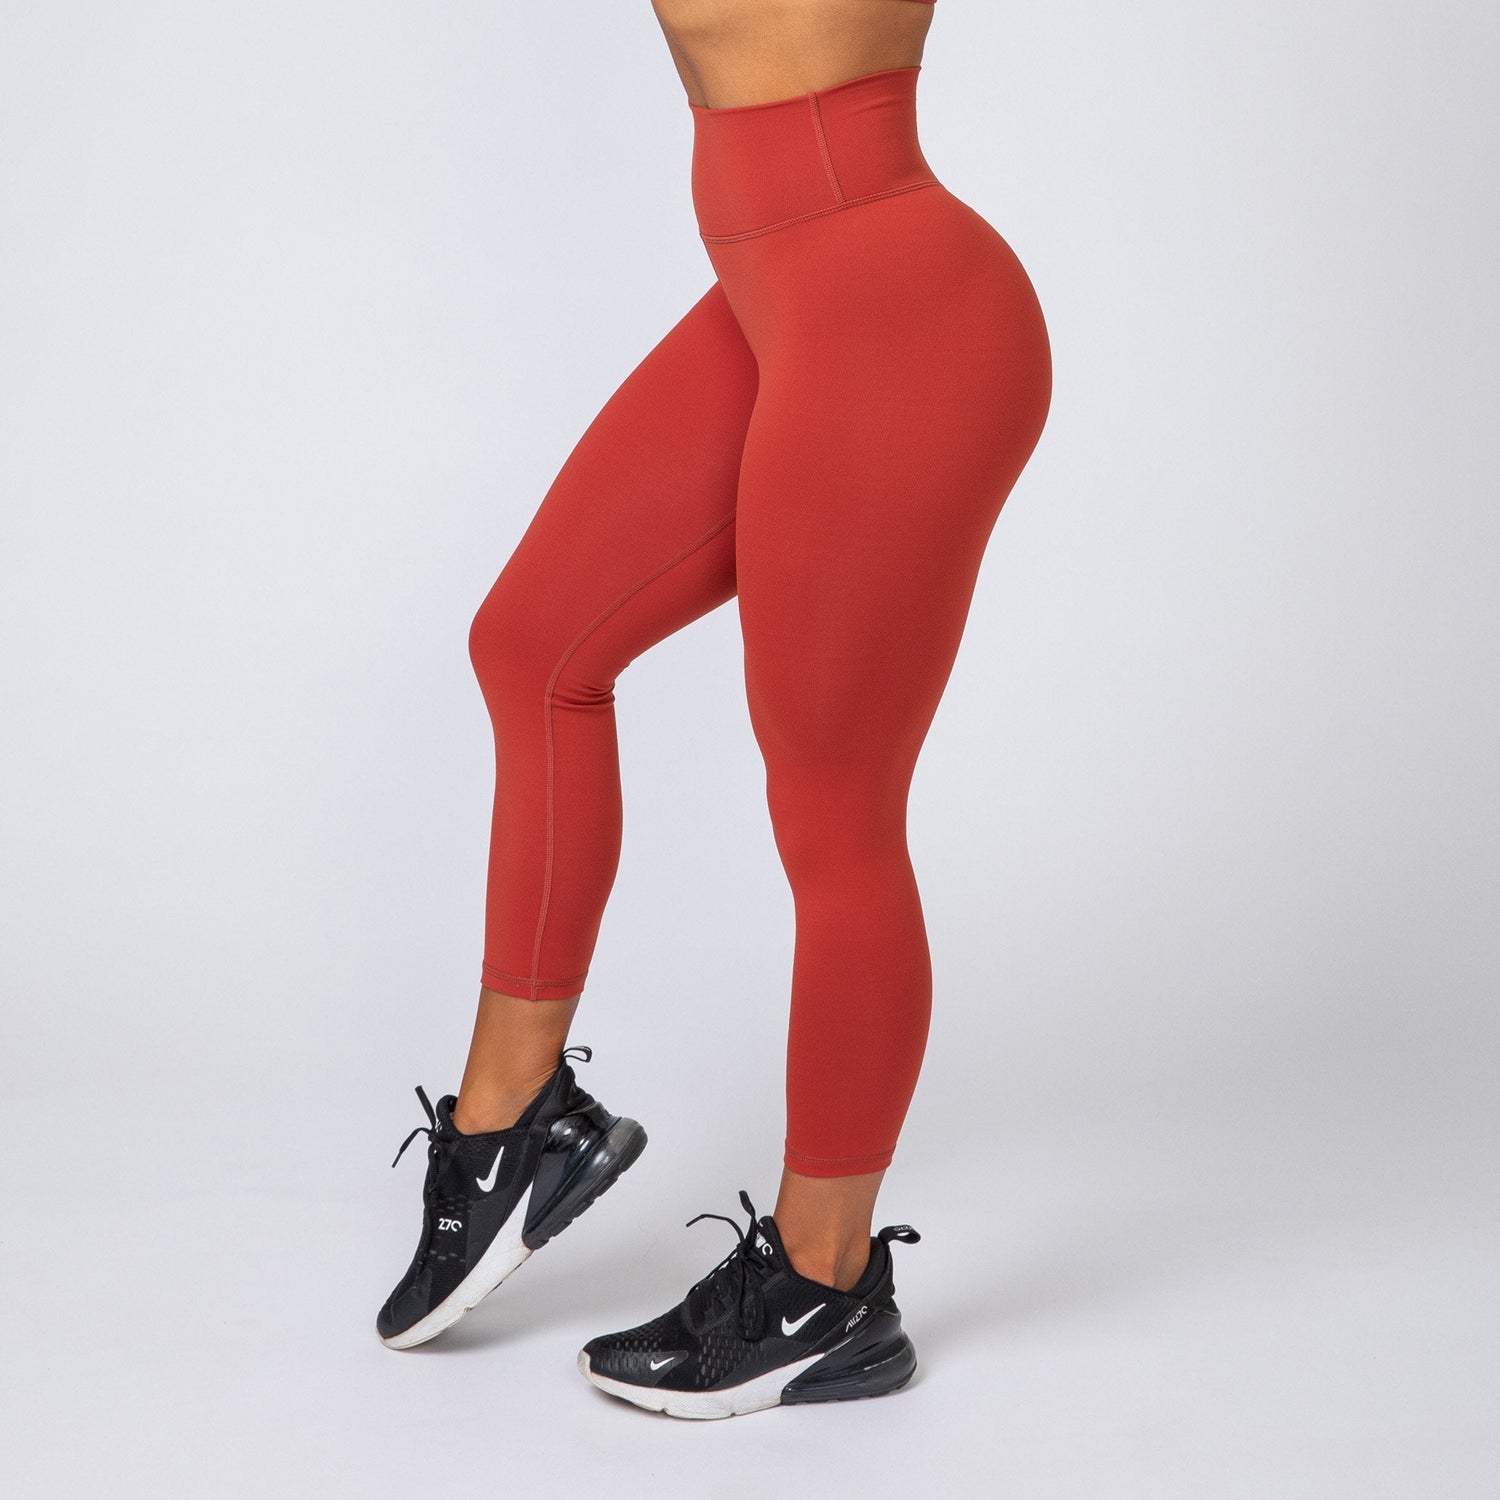 sportscene - Shop your #outfitgoals with Redbat leggings